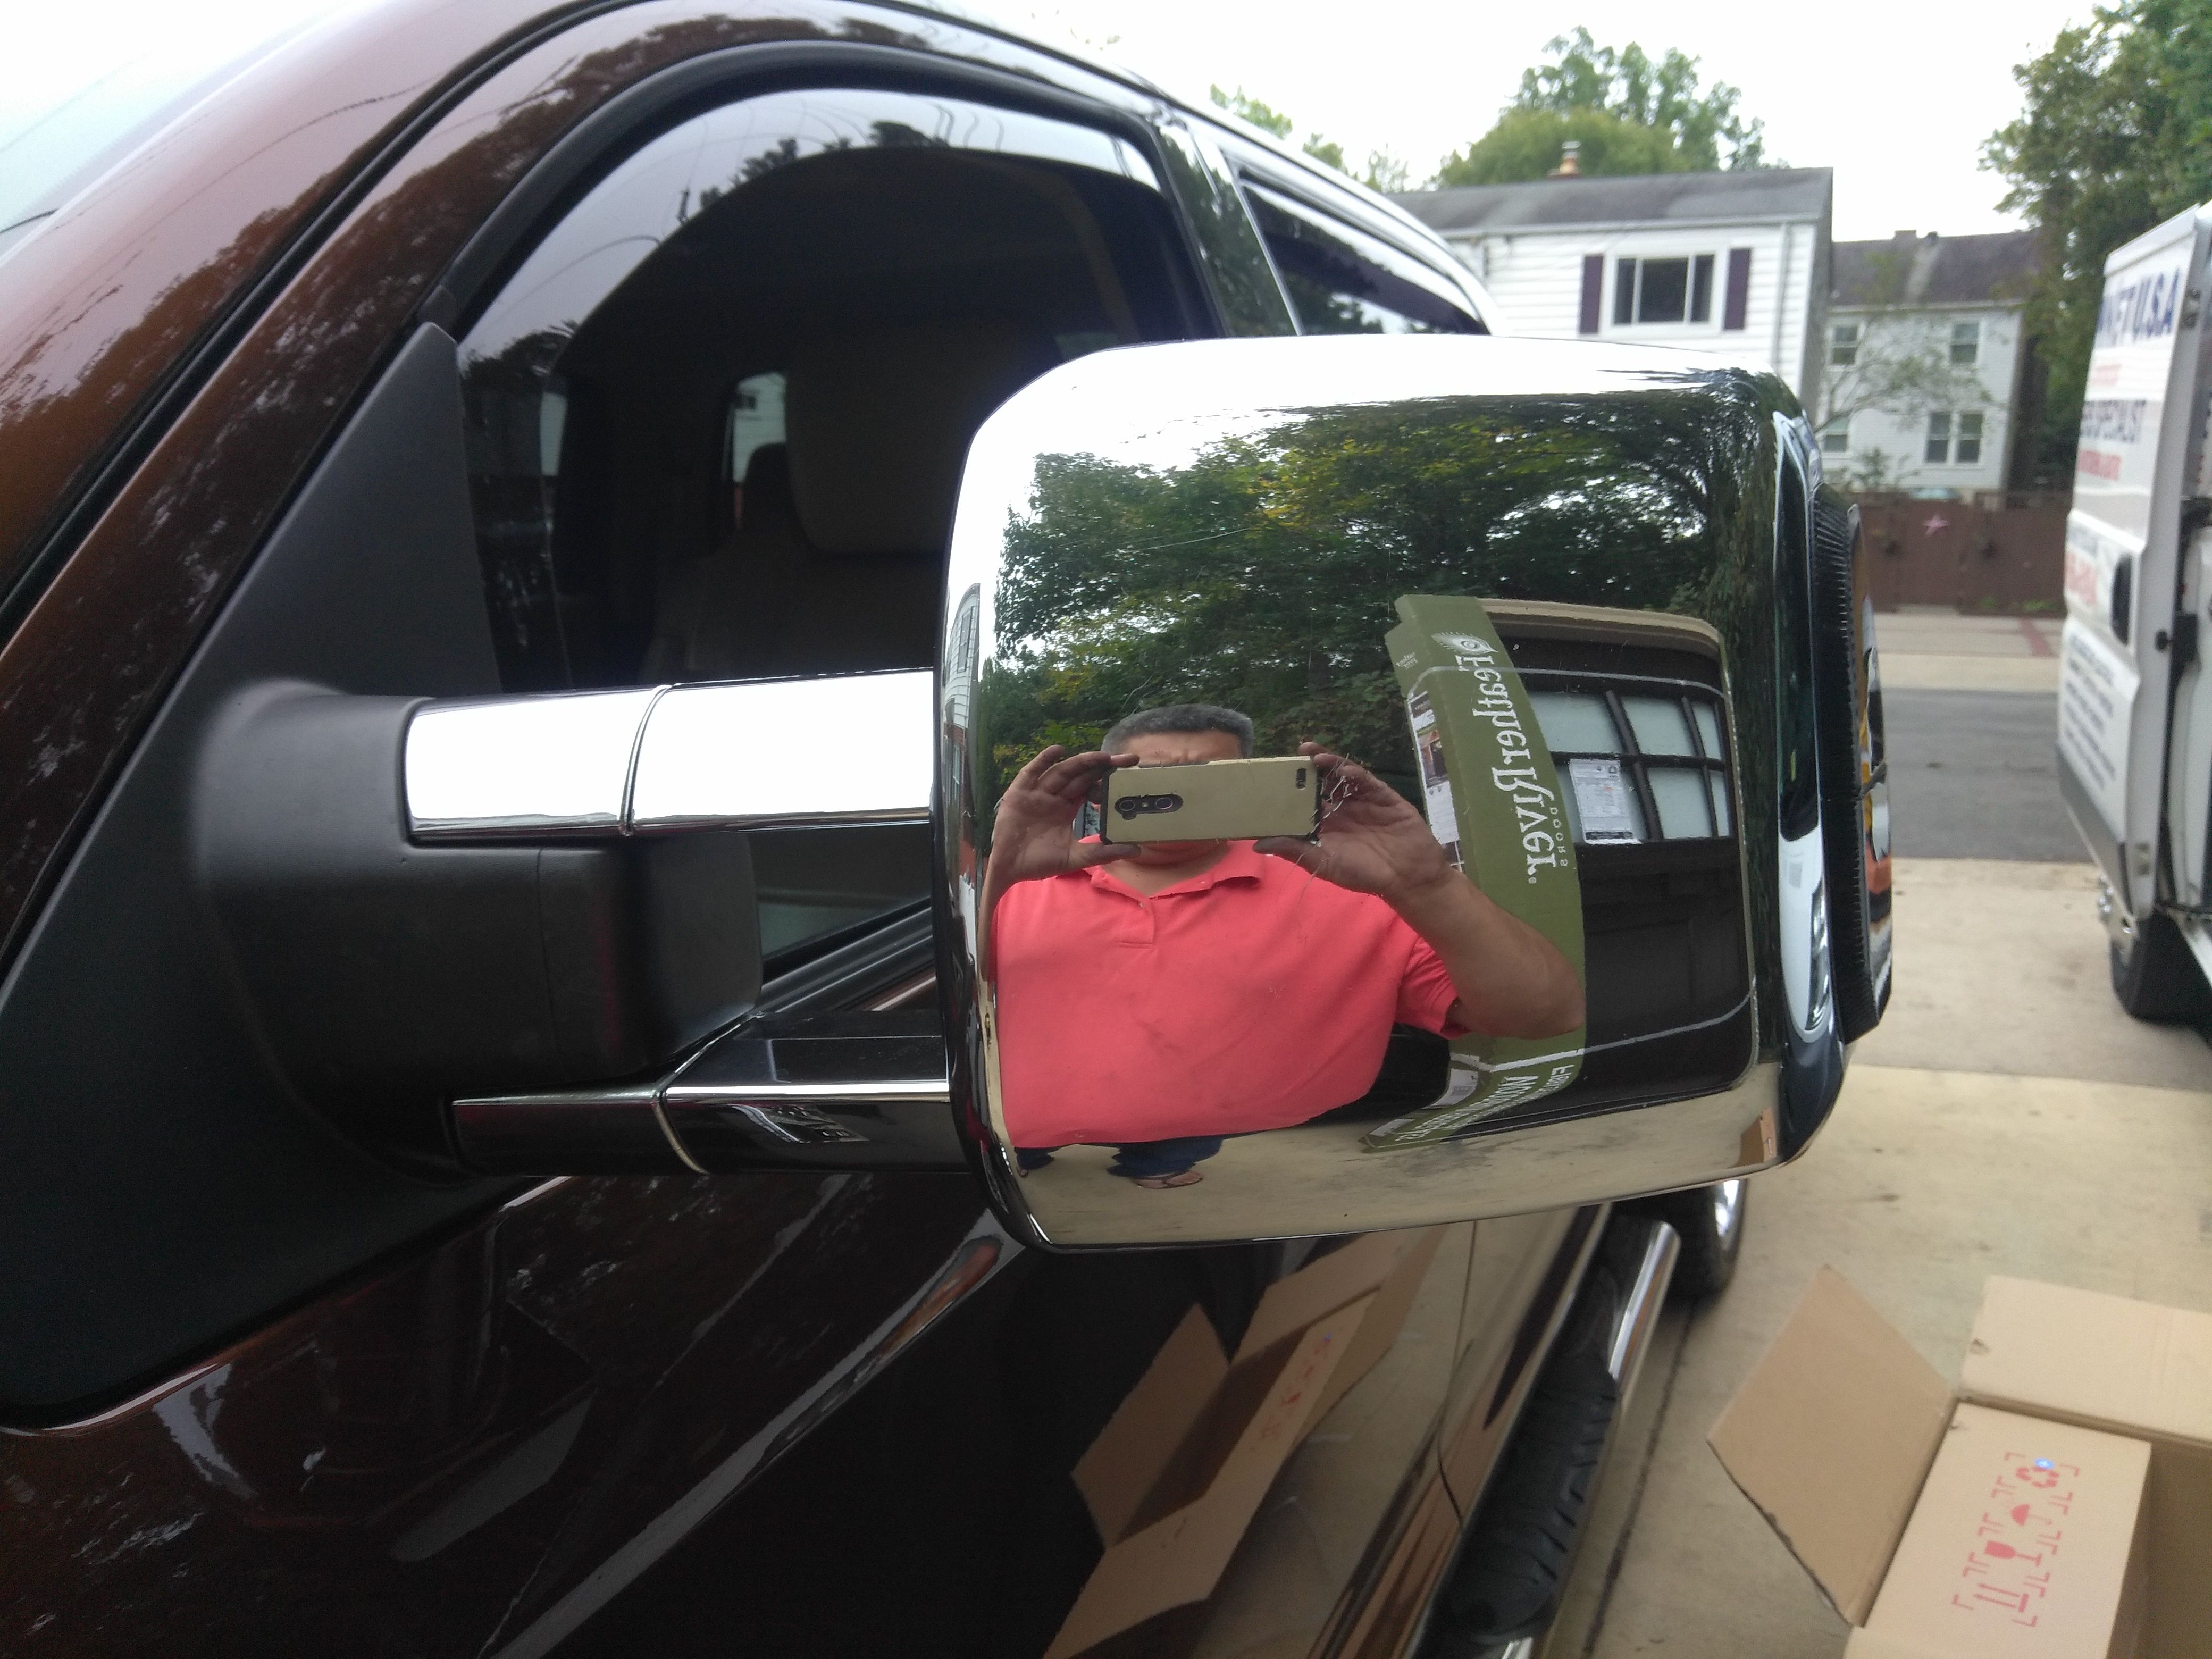 Towing mirrors for Toyota tundra used para tundra UN poquito rallados